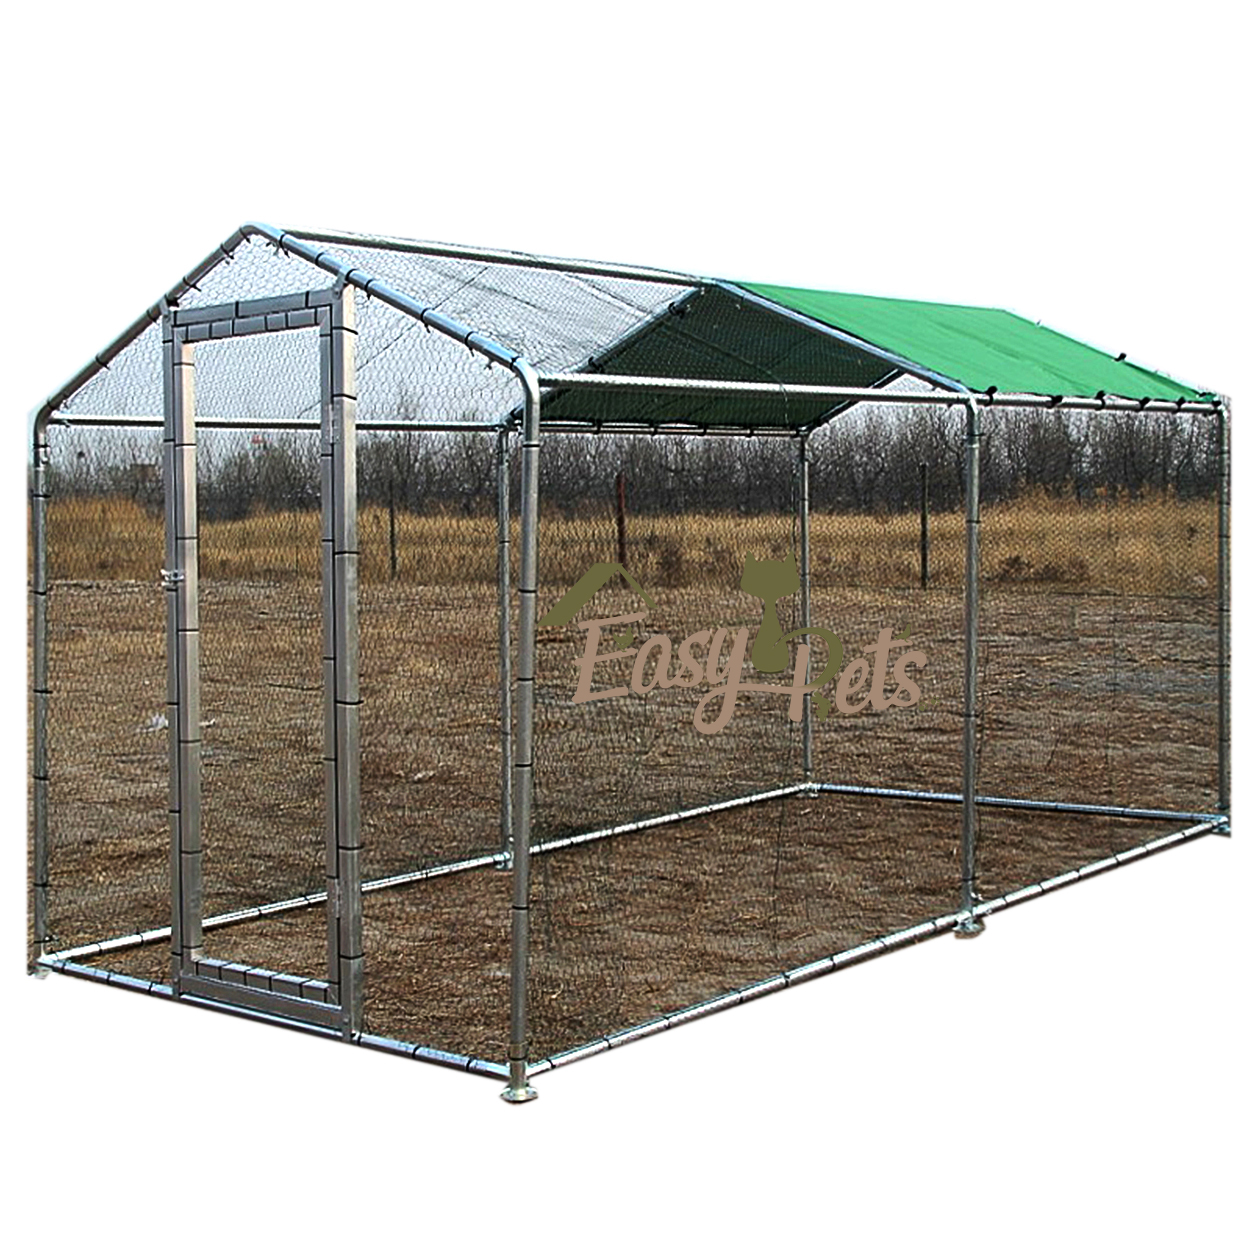 Backyard luxury Metal Strong Stainless Steel wire Walk in Folding Chicken Coop Run Dog Rabbit cage for sale